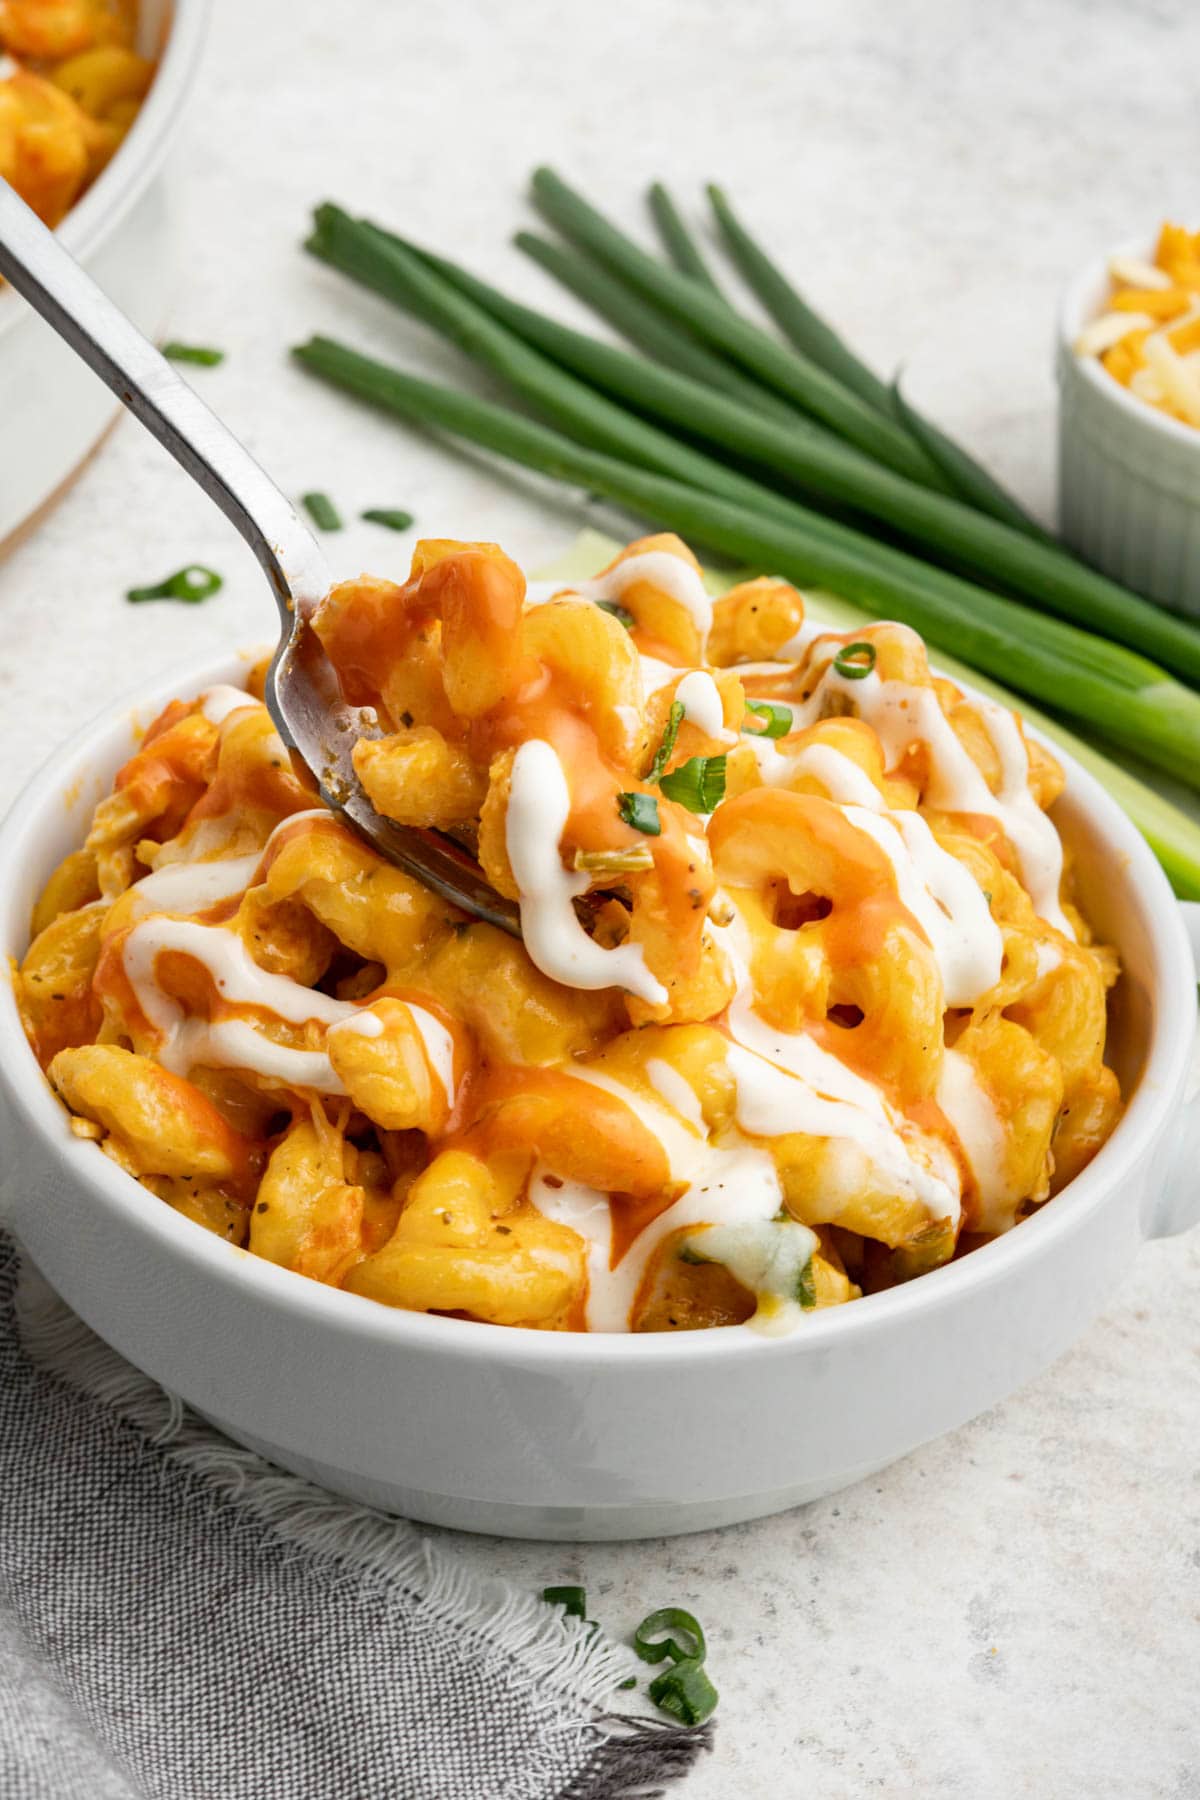 Buffalo chicken pasta drizzled with ranch and served in a white bowl with a fork.